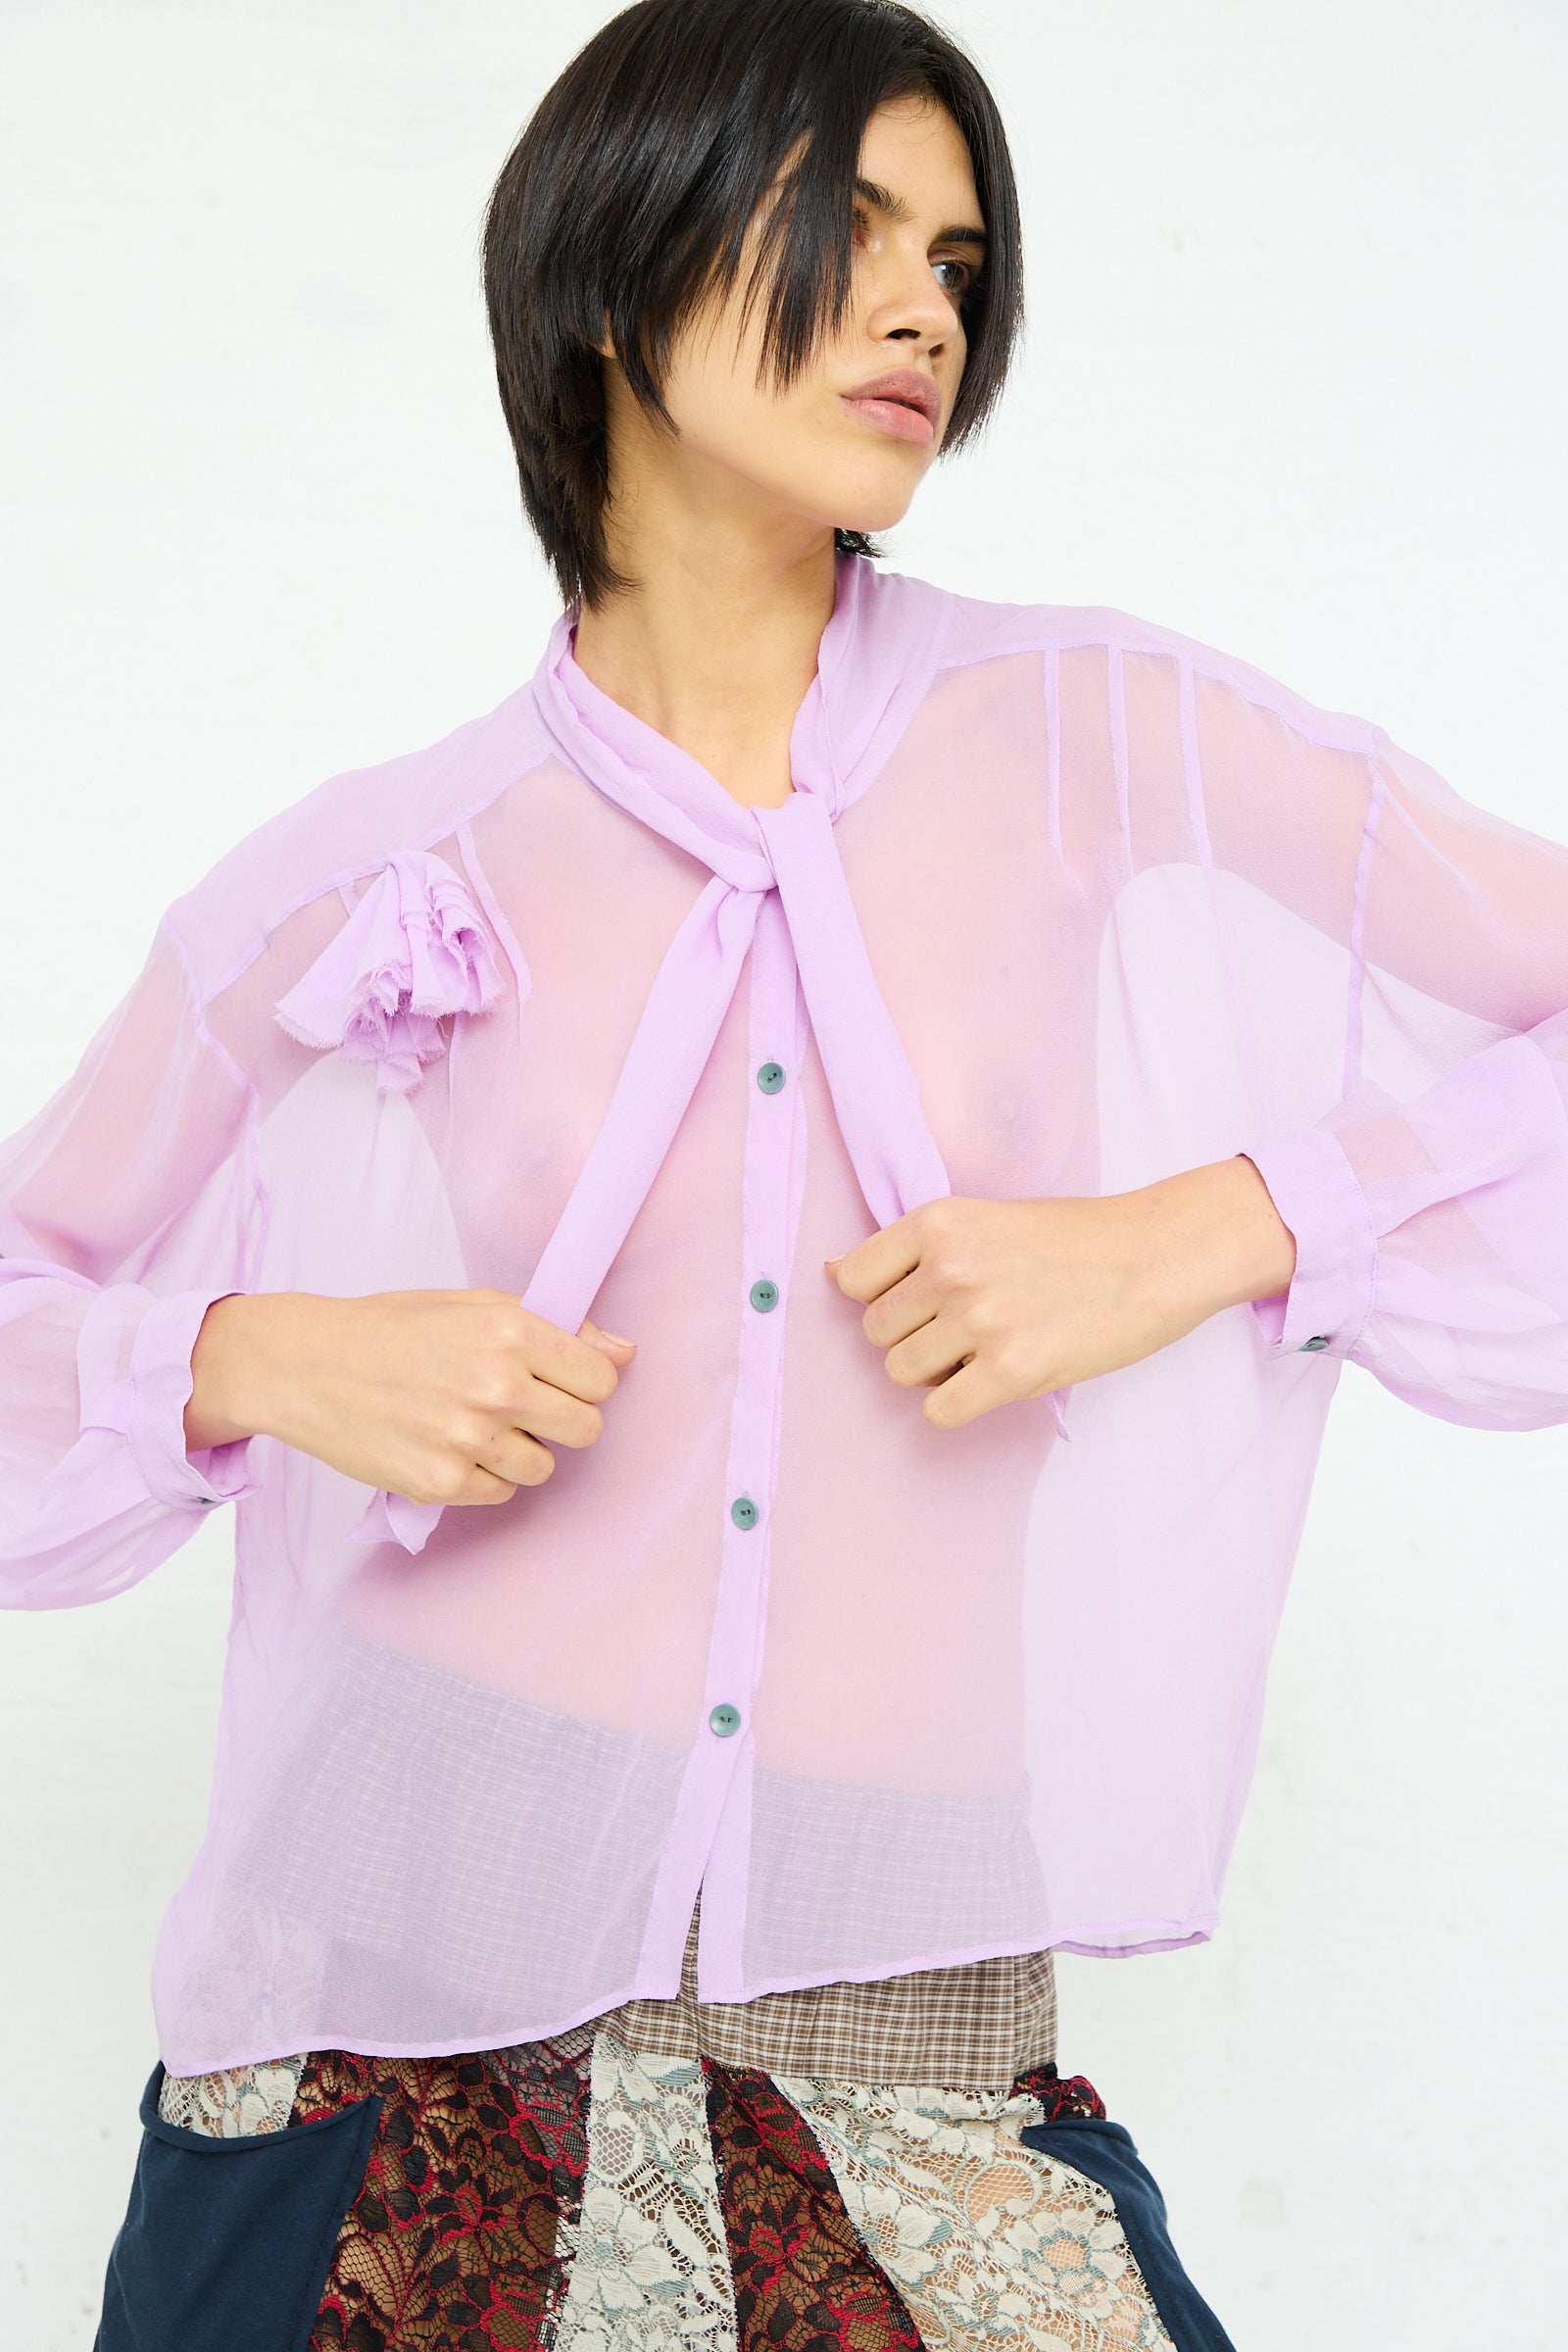 A person posing in a SC103 Silk Chiffon Mandolin Blouse in Sash with a tie at the neck, puffed sleeves, and rosette detail.